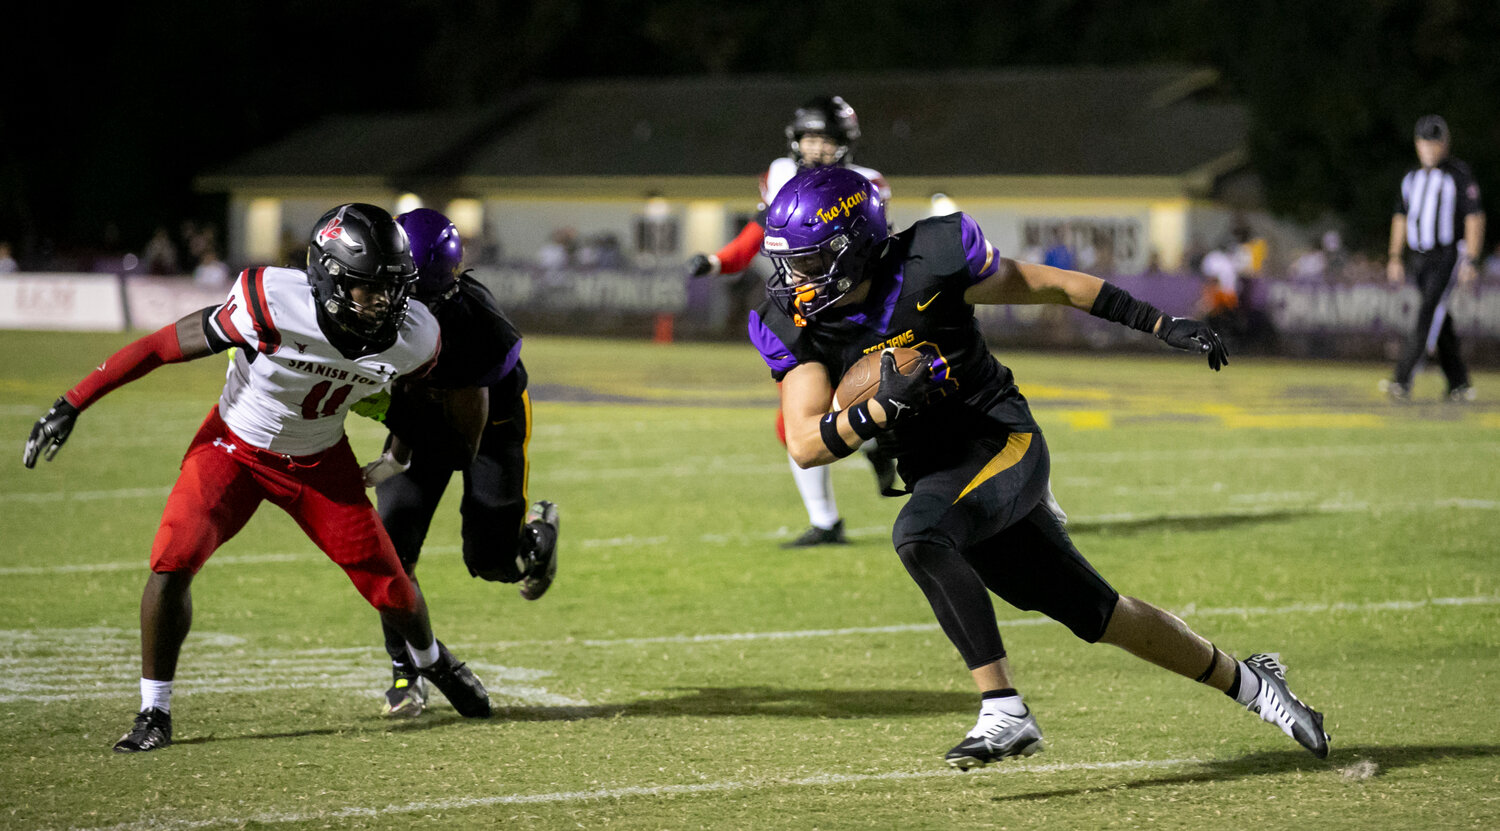 Hayden McLaurin chews up yards after the catch and bears down on a Spanish Fort defender after a first-half catch during Daphne’s rivalry game against the Toros at Jubilee Stadium on Friday, Sept. 29. McLaurin found himself on the end of a 6-yard touchdown pass as the Trojans scored on all four of their first-half possessions.